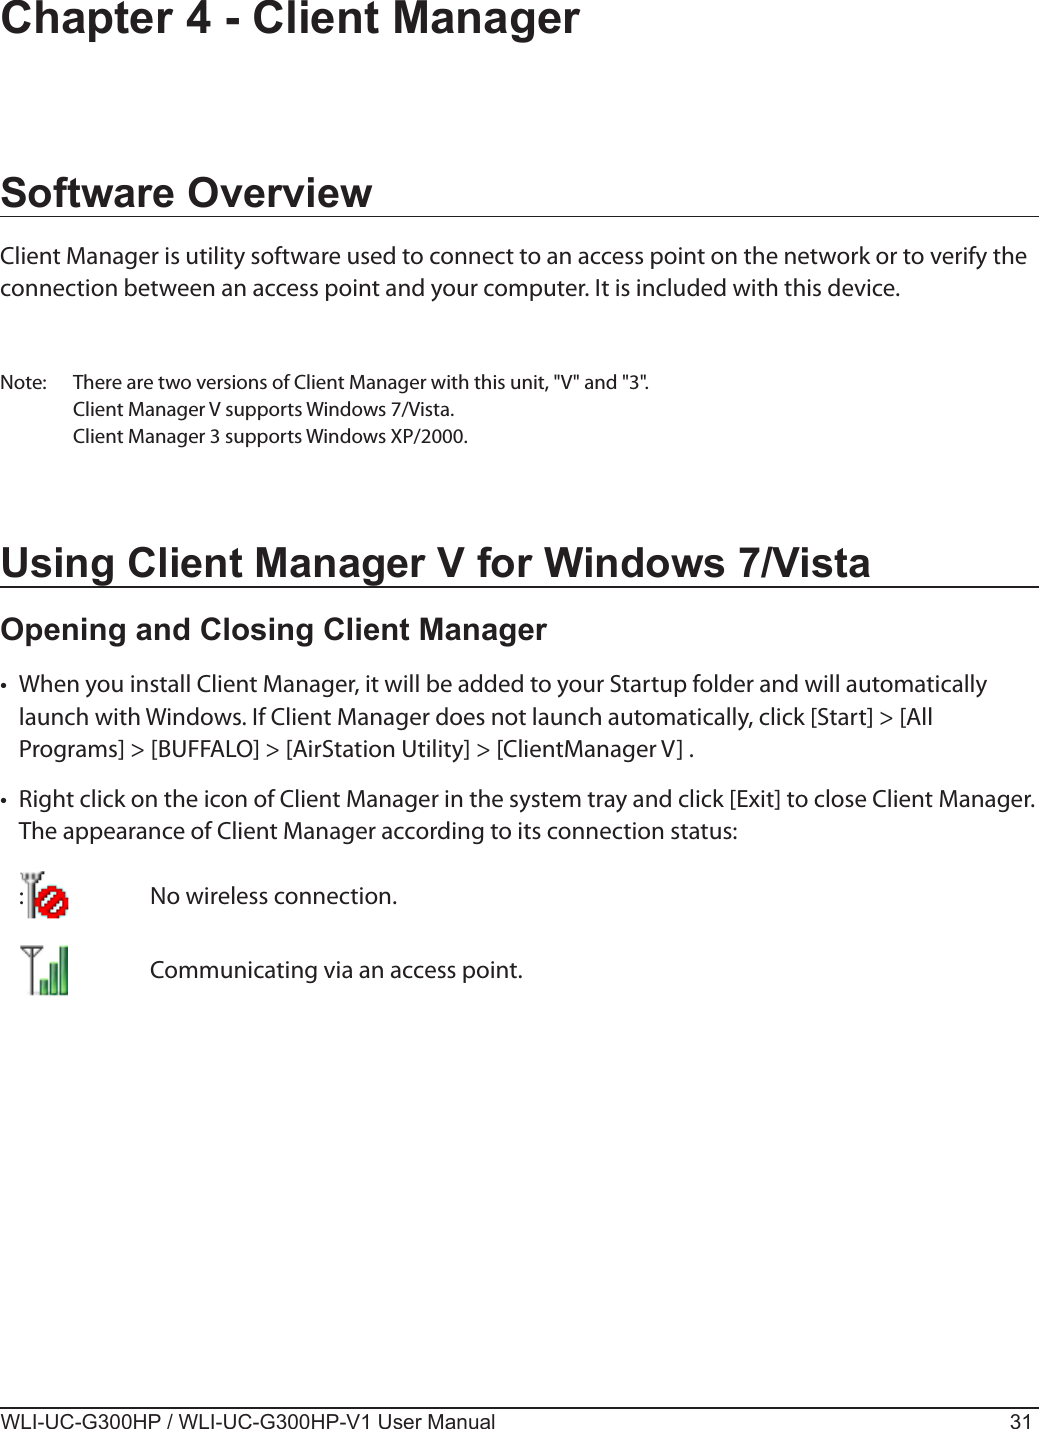 WLI-UC-G300HP / WLI-UC-G300HP-V1 User Manual 31Chapter 4 - Client ManagerSoftware OverviewClient Manager is utility software used to connect to an access point on the network or to verify the connection between an access point and your computer. It is included with this device. Note:  There are two versions of Client Manager with this unit, &quot;V&quot; and &quot;3&quot;.  Client Manager V supports Windows 7/Vista.  Client Manager 3 supports Windows XP/2000.Using Client Manager V for Windows 7/VistaOpening and Closing Client Manager•  When you install Client Manager, it will be added to your Startup folder and will automatically launch with Windows. If Client Manager does not launch automatically, click [Start] &gt; [All Programs] &gt; [BUFFALO] &gt; [AirStation Utility] &gt; [ClientManager V] .•  Right click on the icon of Client Manager in the system tray and click [Exit] to close Client Manager.  The appearance of Client Manager according to its connection status:  :    No wireless connection.       Communicating via an access point.